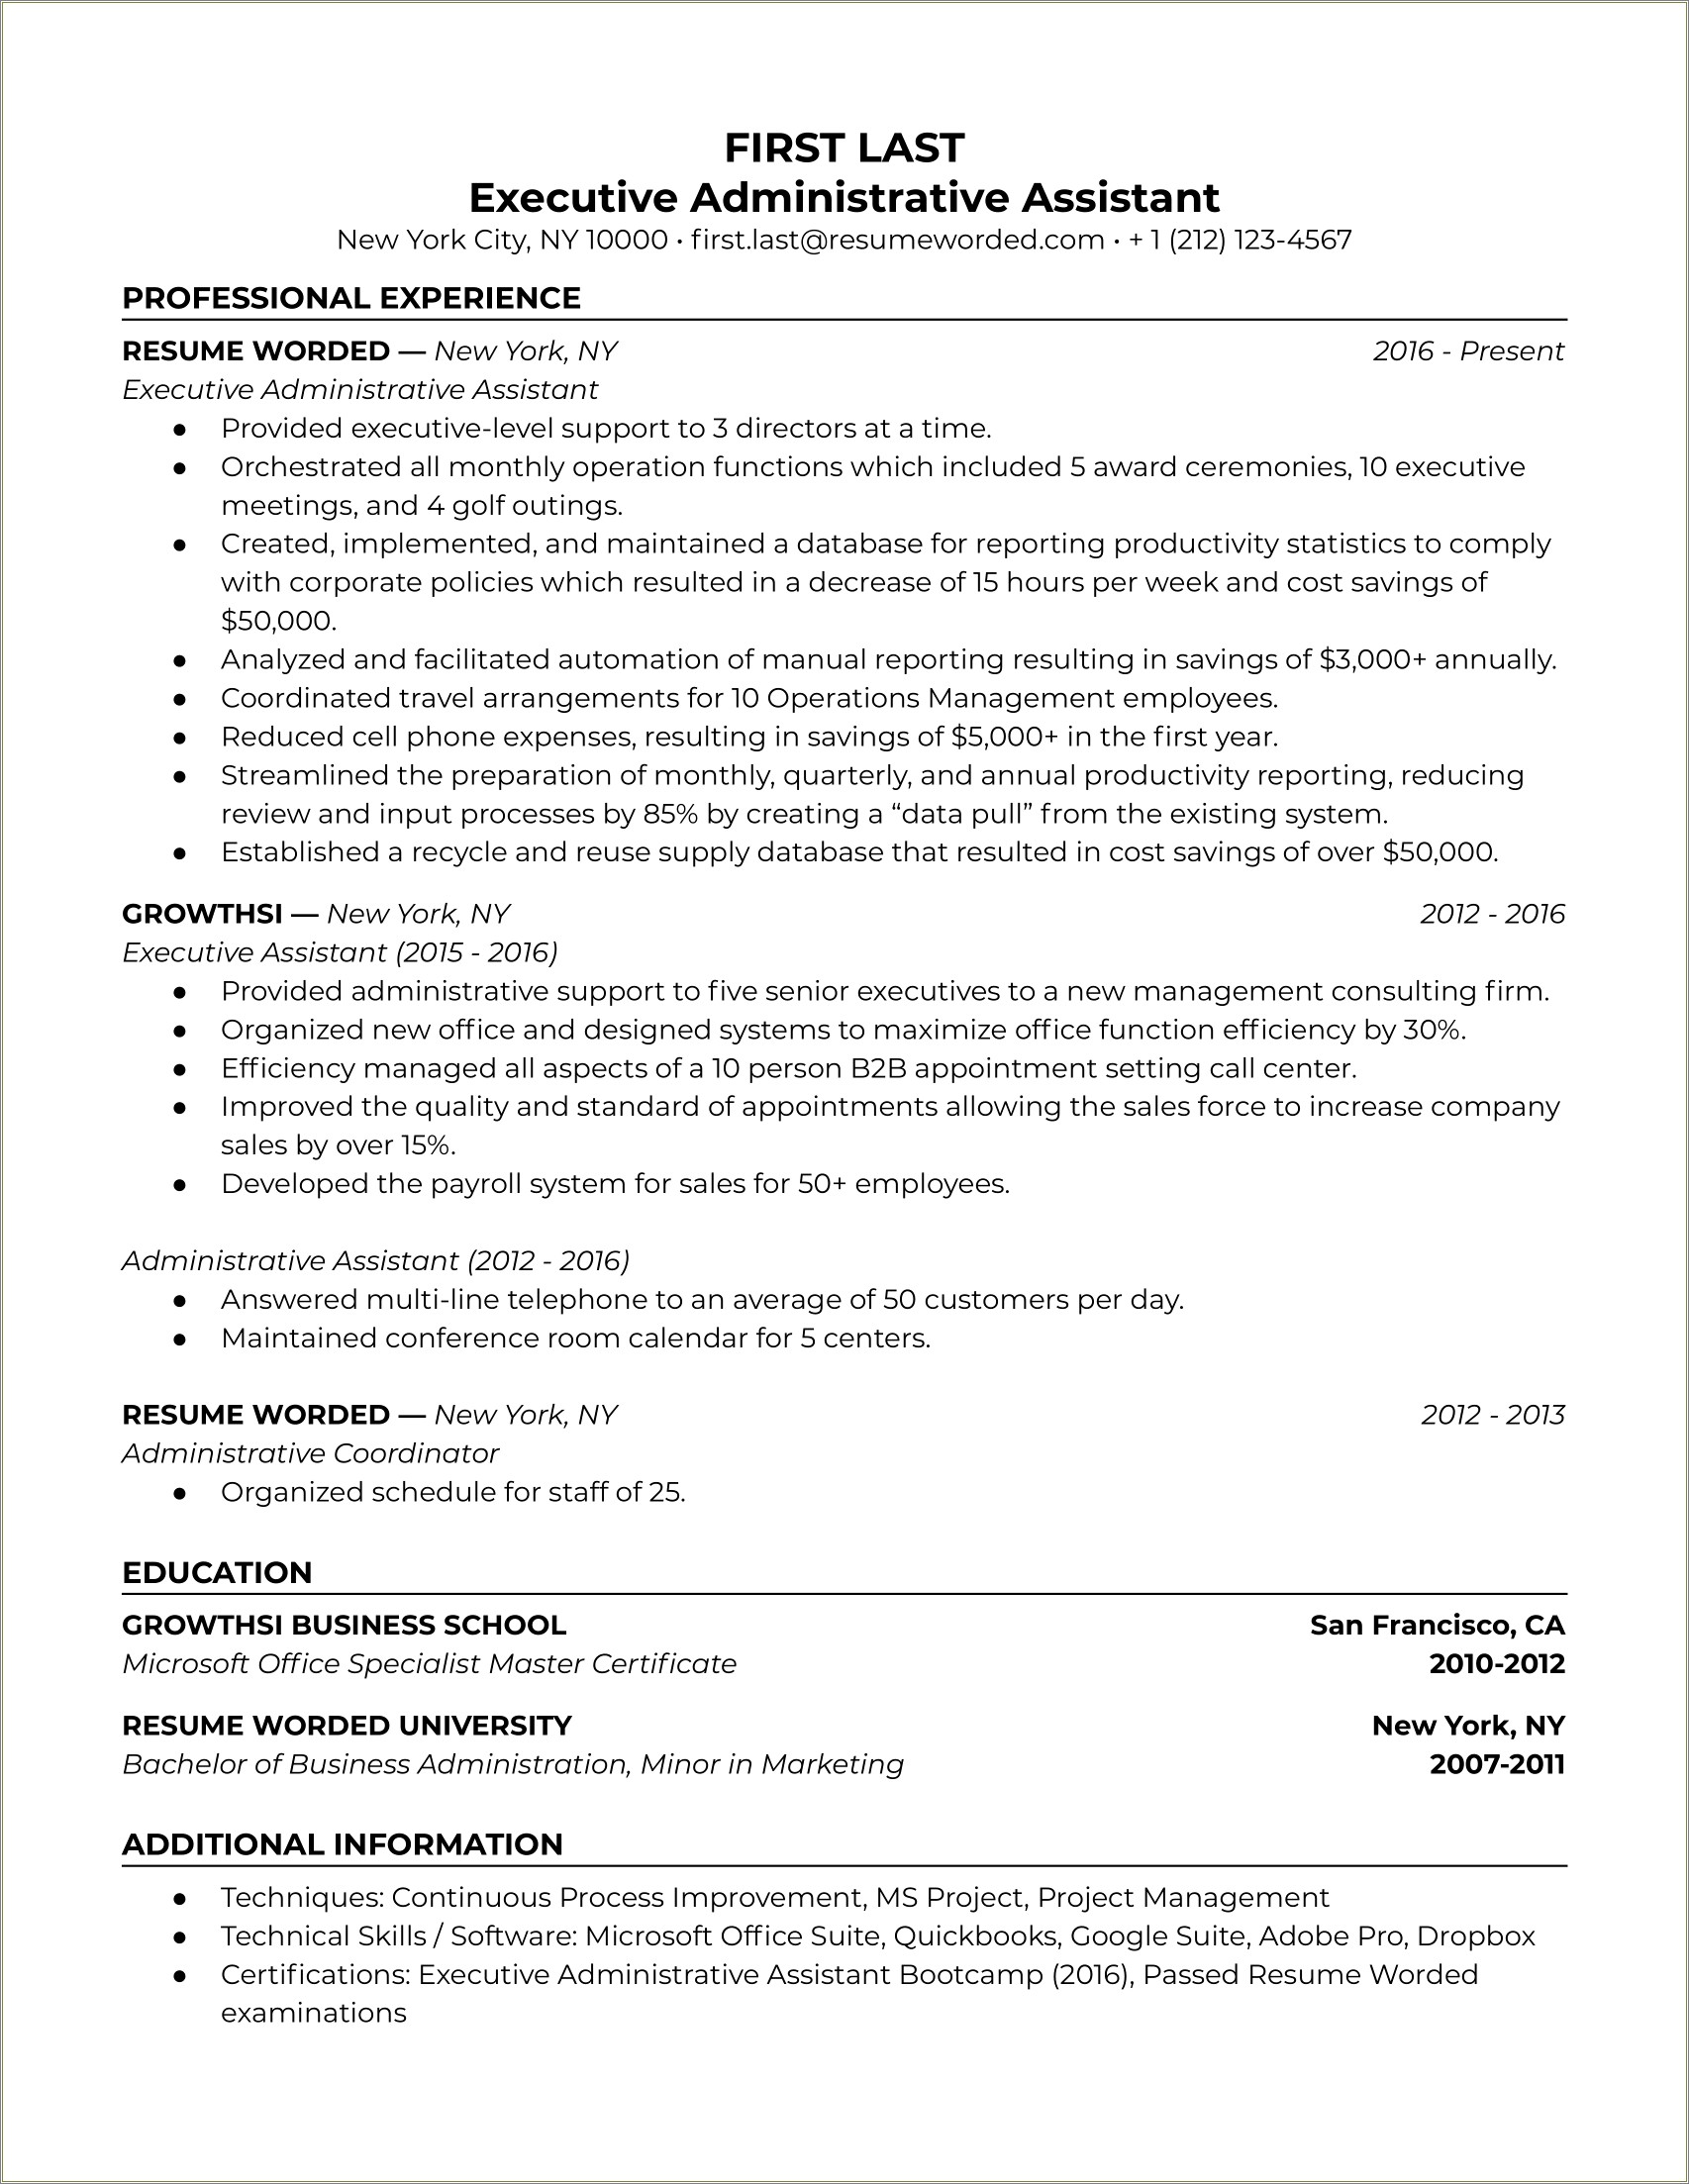 Administrative Assistant Summary Statement For Resume